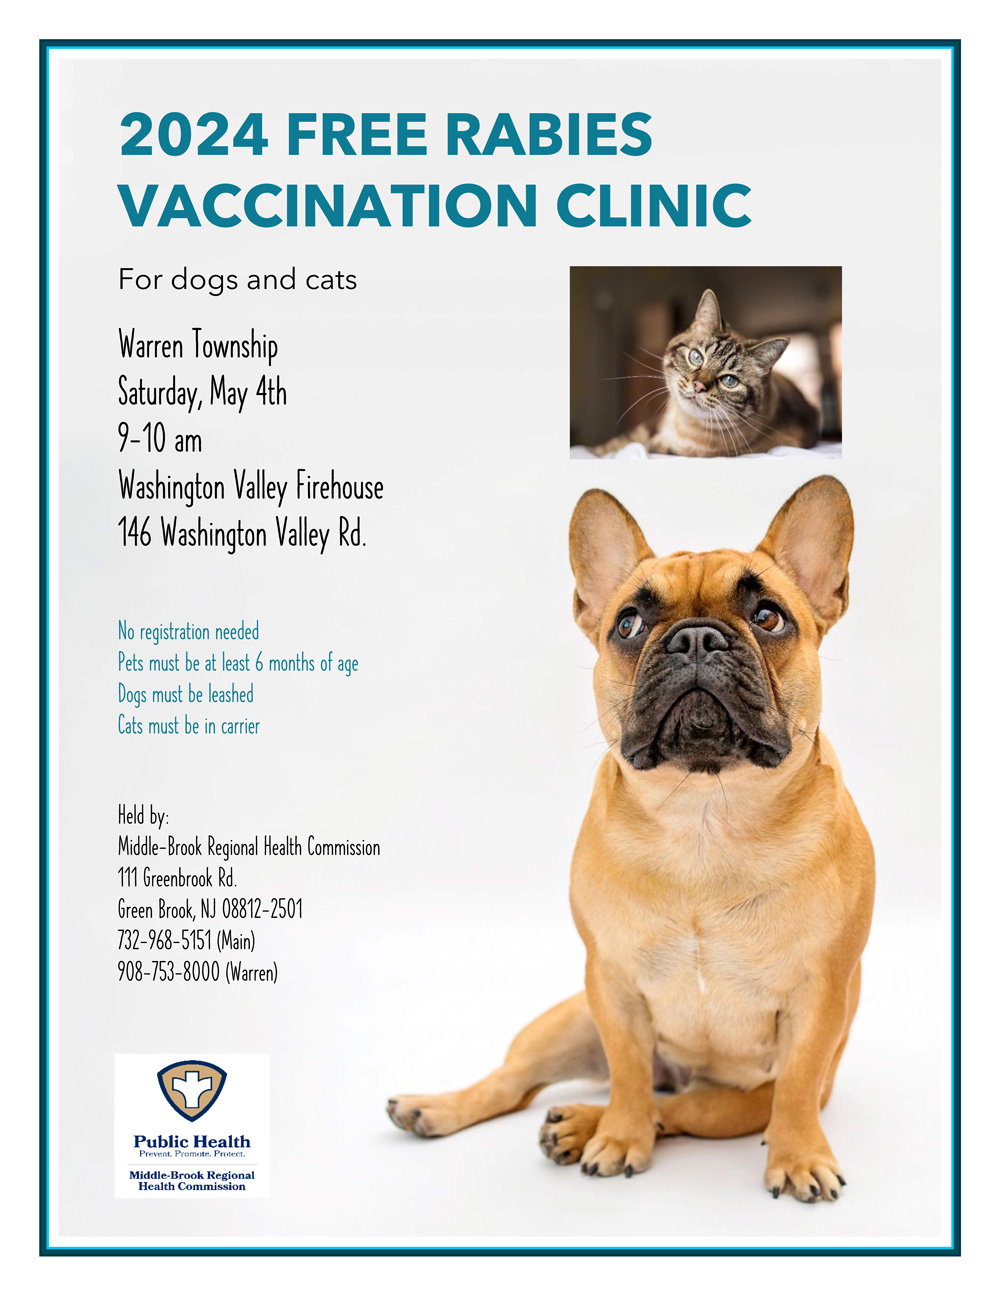 Rabies Clinic Flyer with a grey background and a picture of a tan dog sitting and a tabby cat looking at the camera.